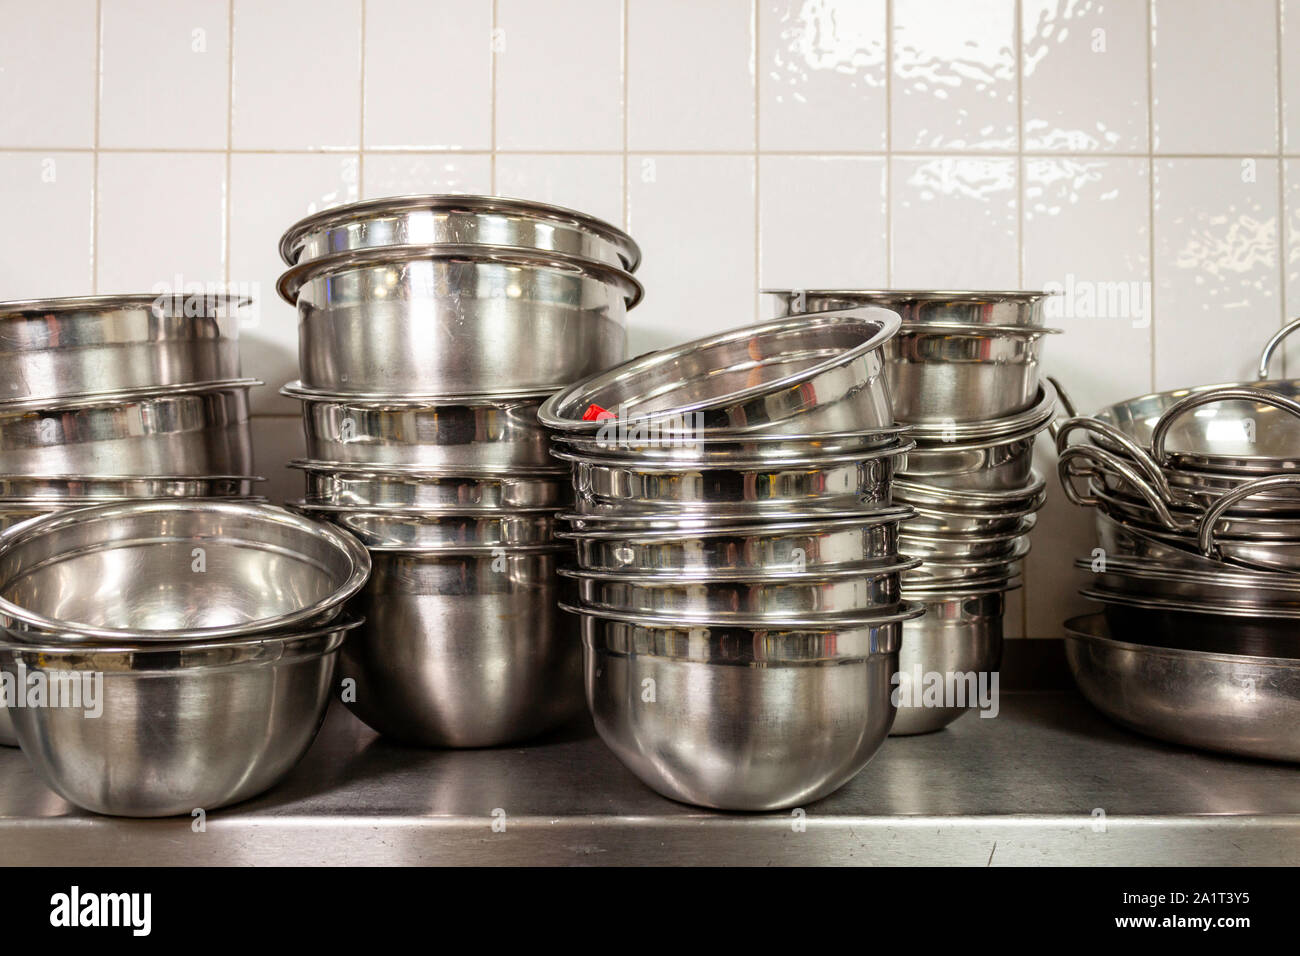 Stacks of stainless steel mixing bowls on a stainless steel shelf in an industrial kitchen Stock Photo